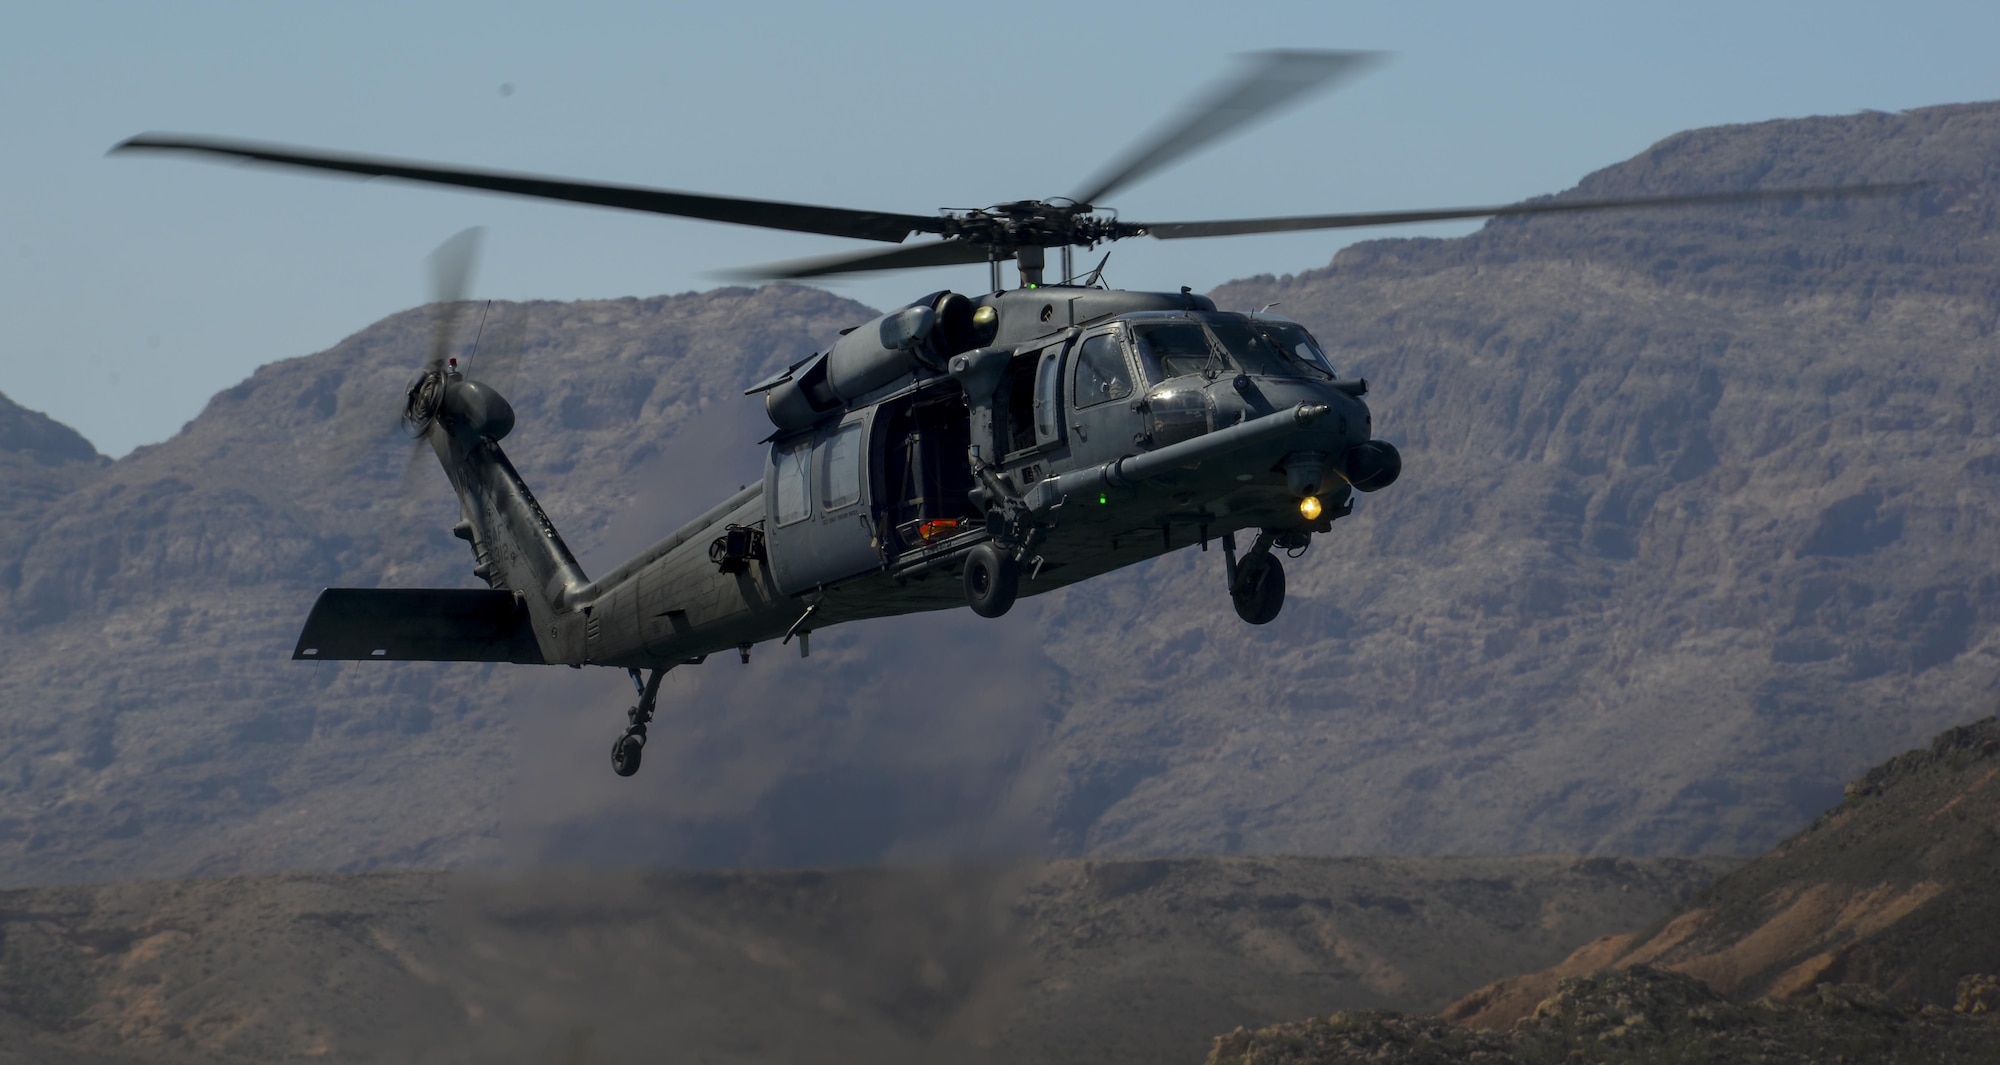 An HH-60G Pave Hawk, assigned to the 58th Rescue Squadron from Nellis Air Force Base, Nevada, preforms water operations training at Lake Mead, March 15, 2016. The primary mission of the HH-60G helicopter is to conduct day or night personnel recovery operations into hostile environments to recover isolated personnel during war. (U.S. Air Force photo by Airman 1st Class Kevin Tanenbaum)